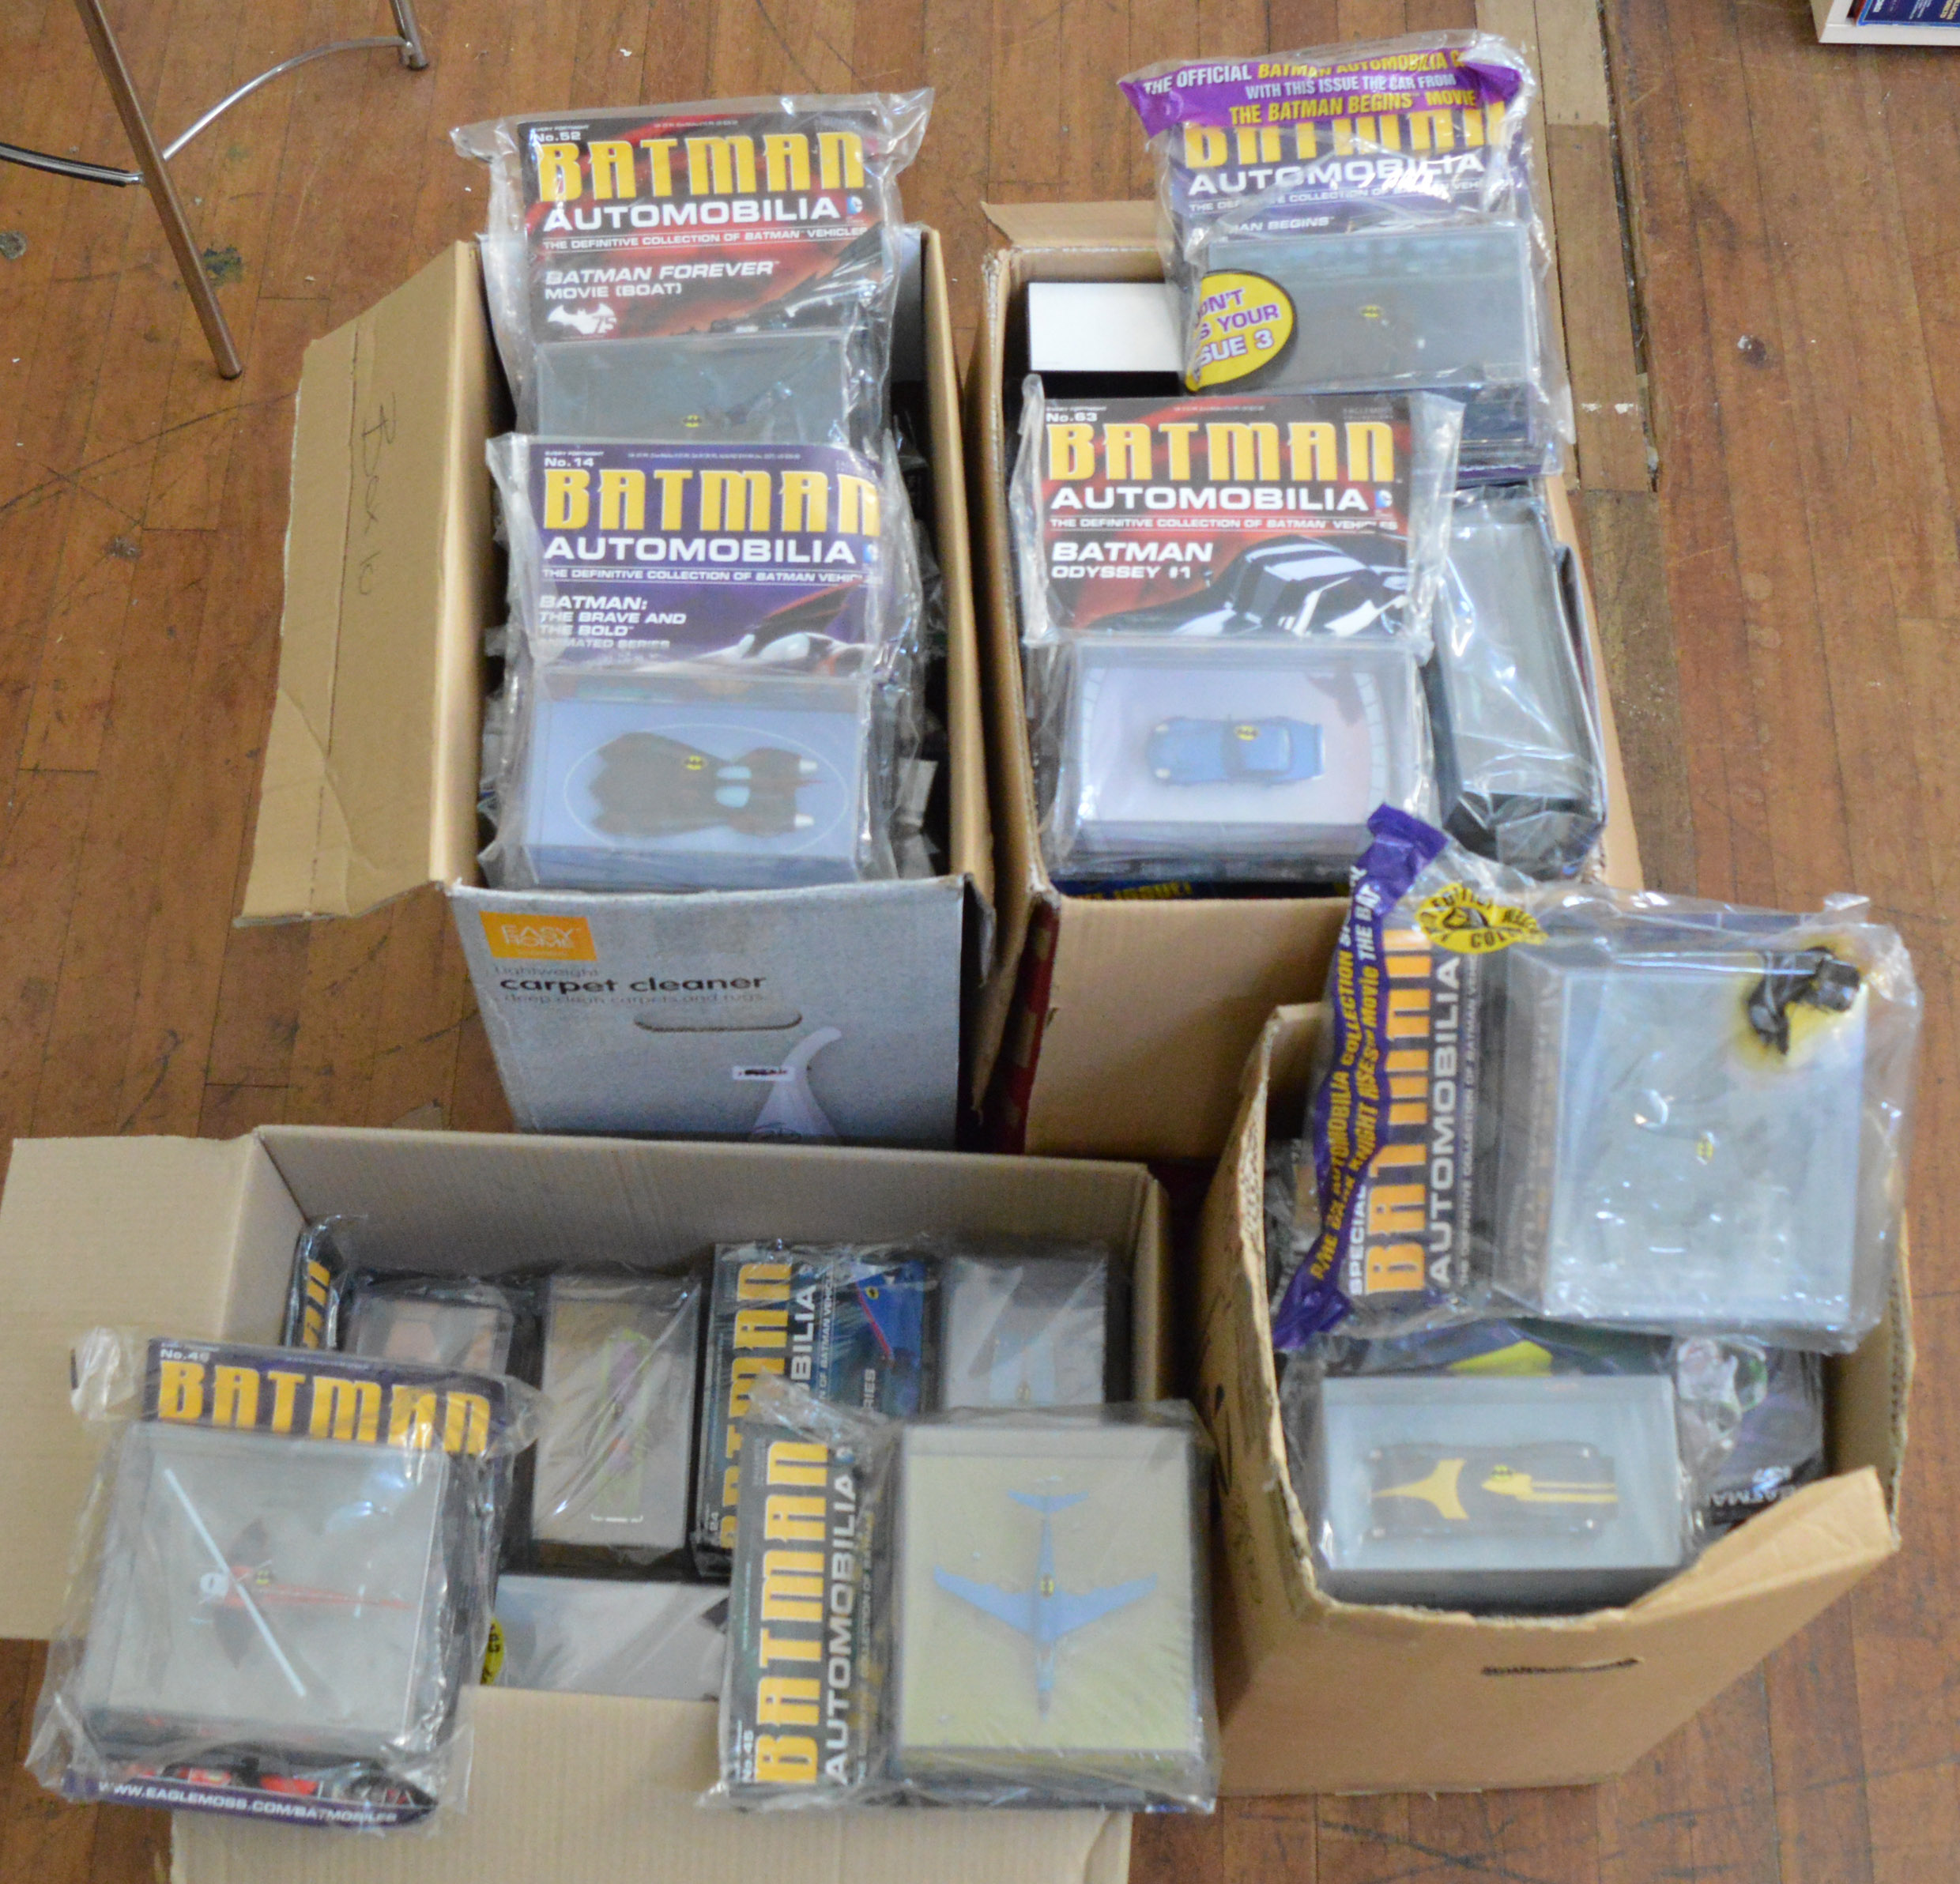 96 Special Batman Automobilia magazine issue diecast models, most models are still sealed with